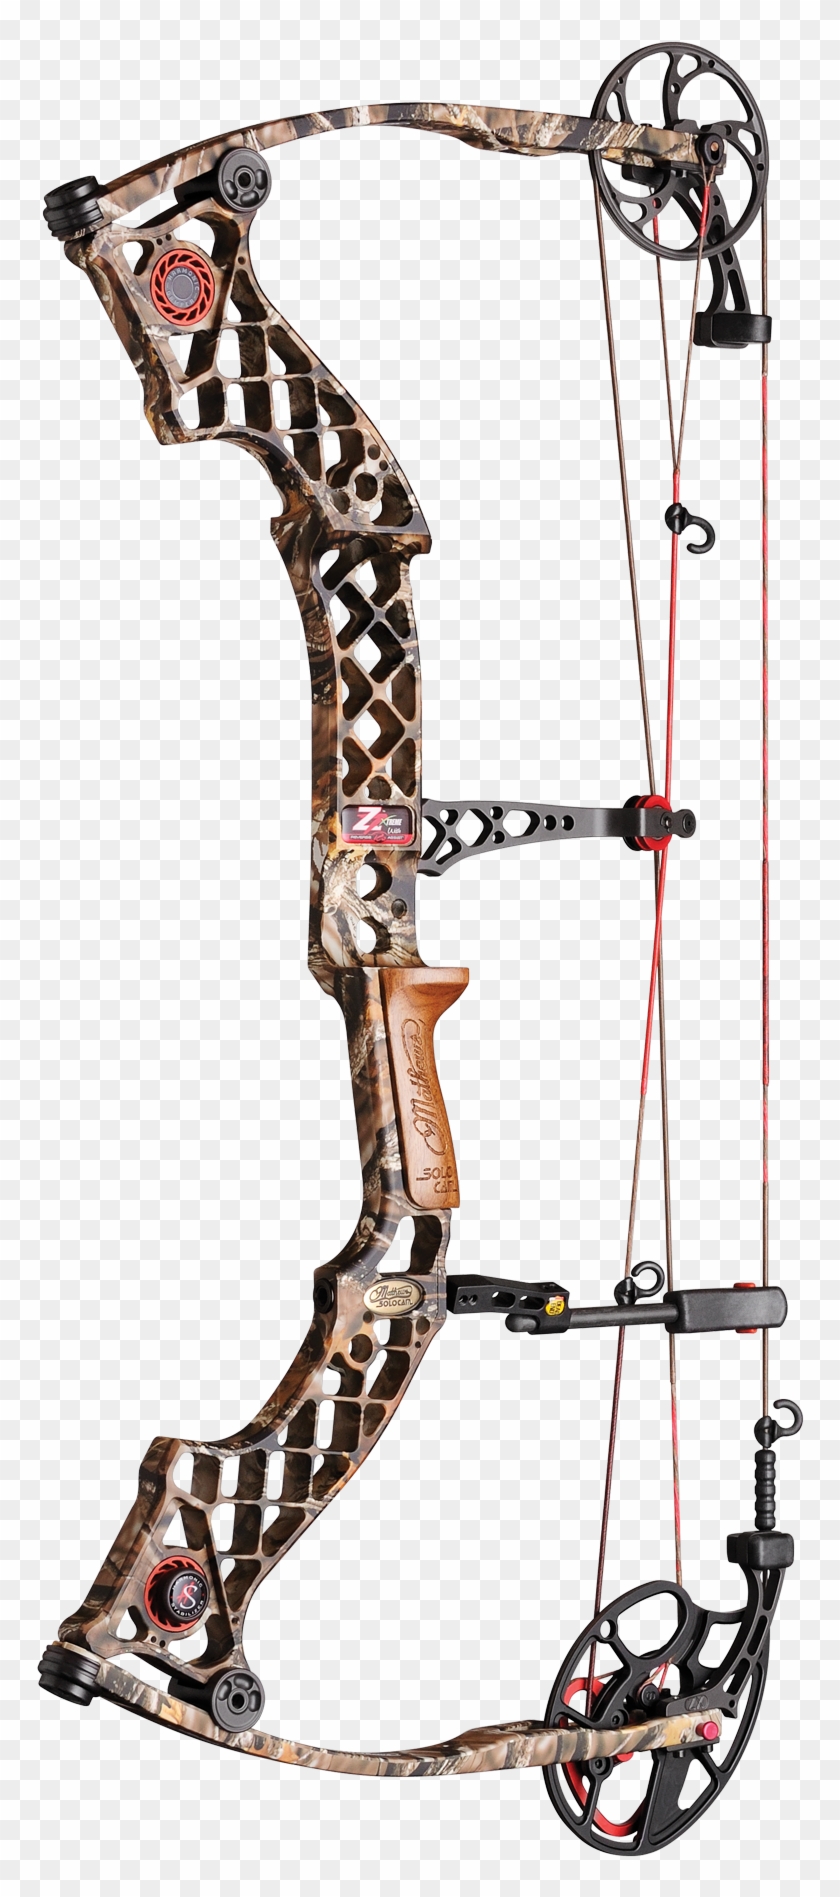 Matthews Z7 Extreme - Parts Of A Compound Bow #750742